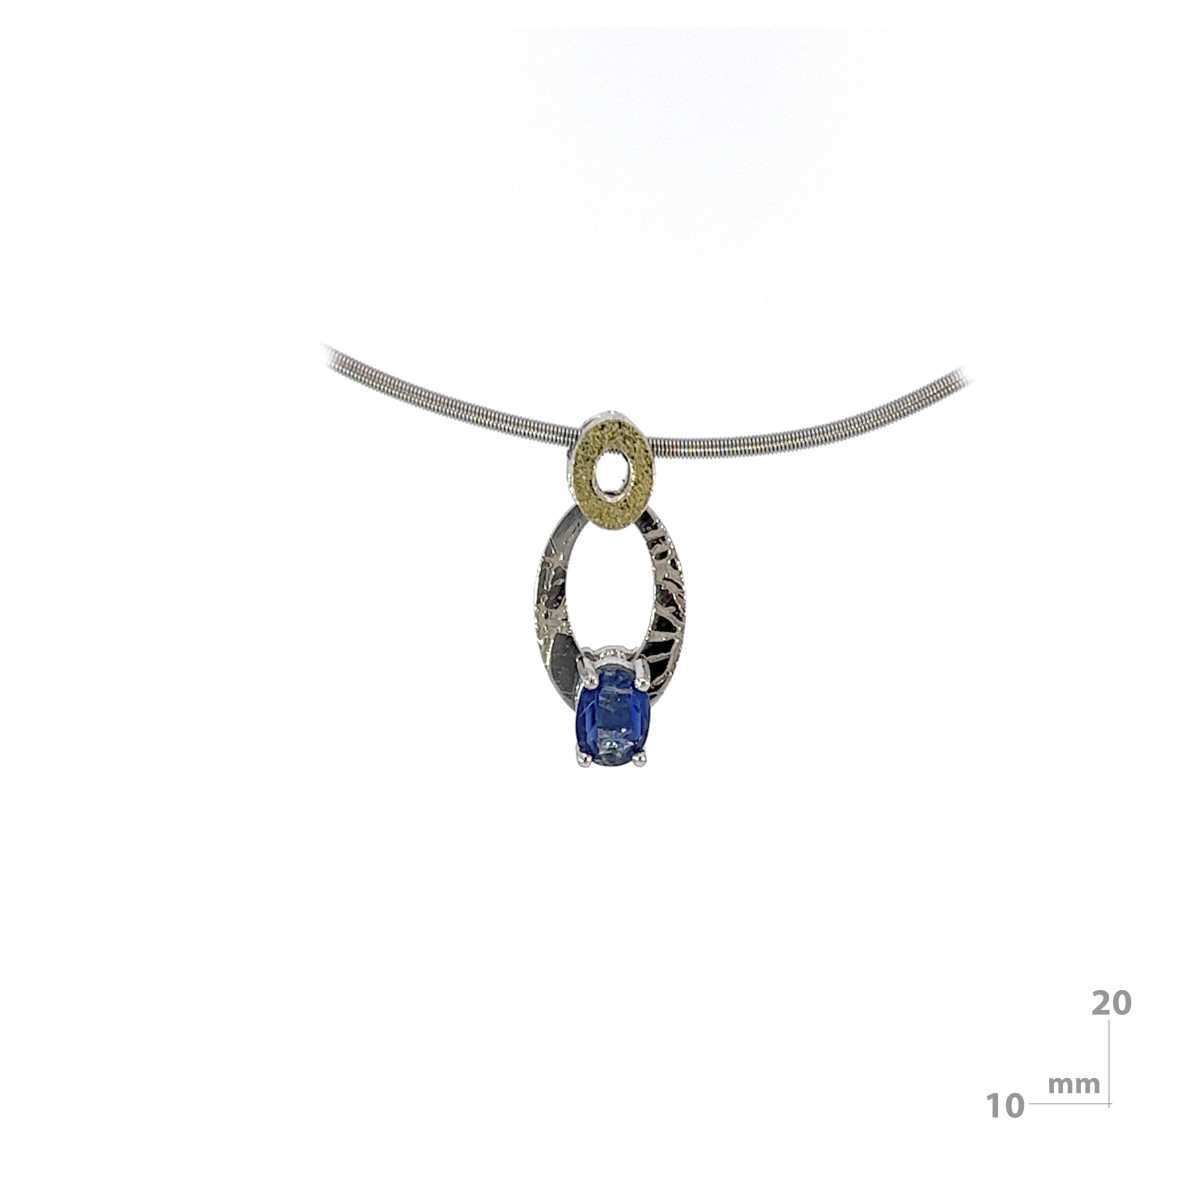 Silver, gold and kyanite pendant